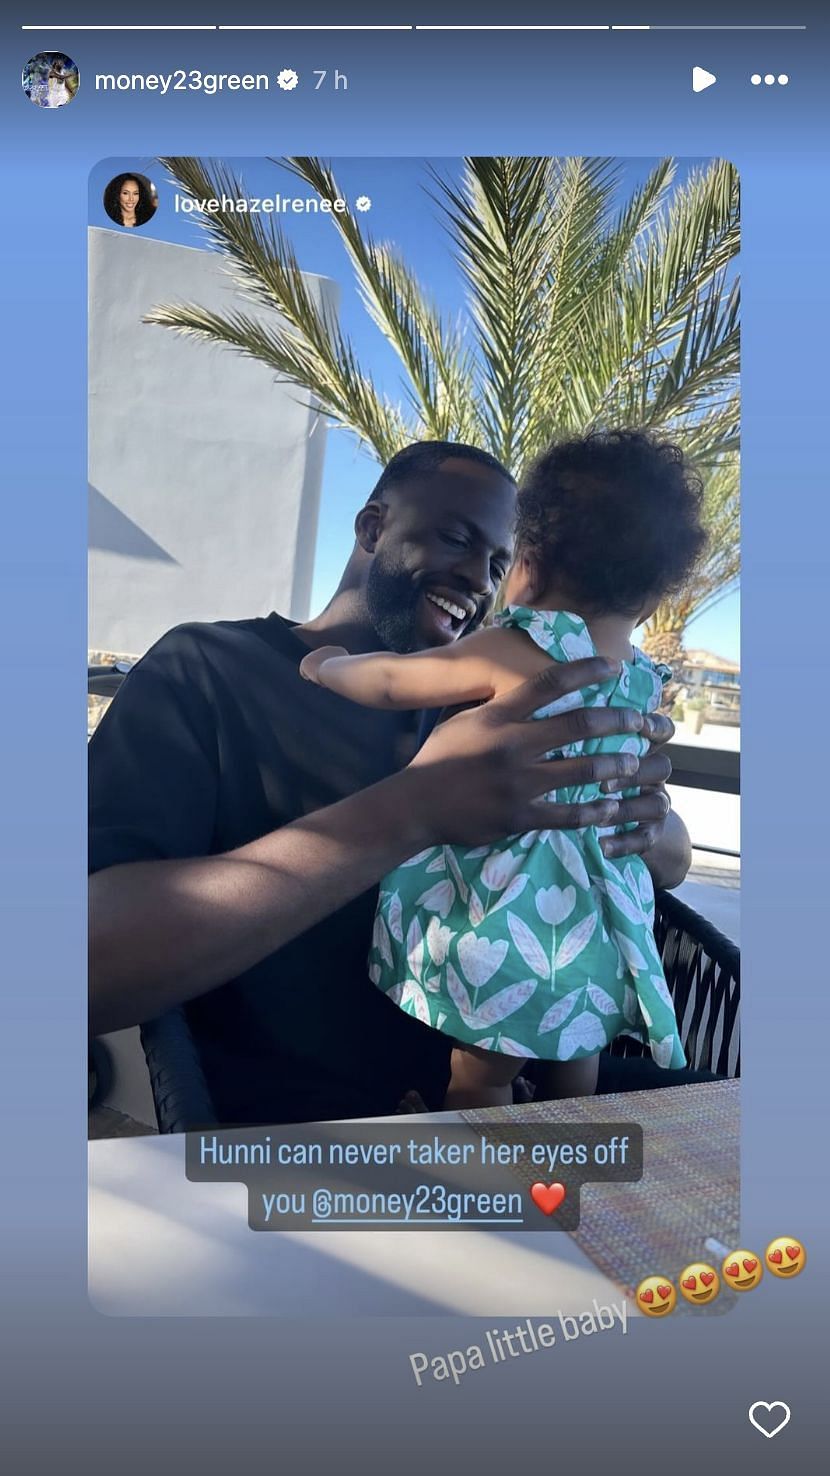 Draymond Green was seen having a sweet moment with his daughter